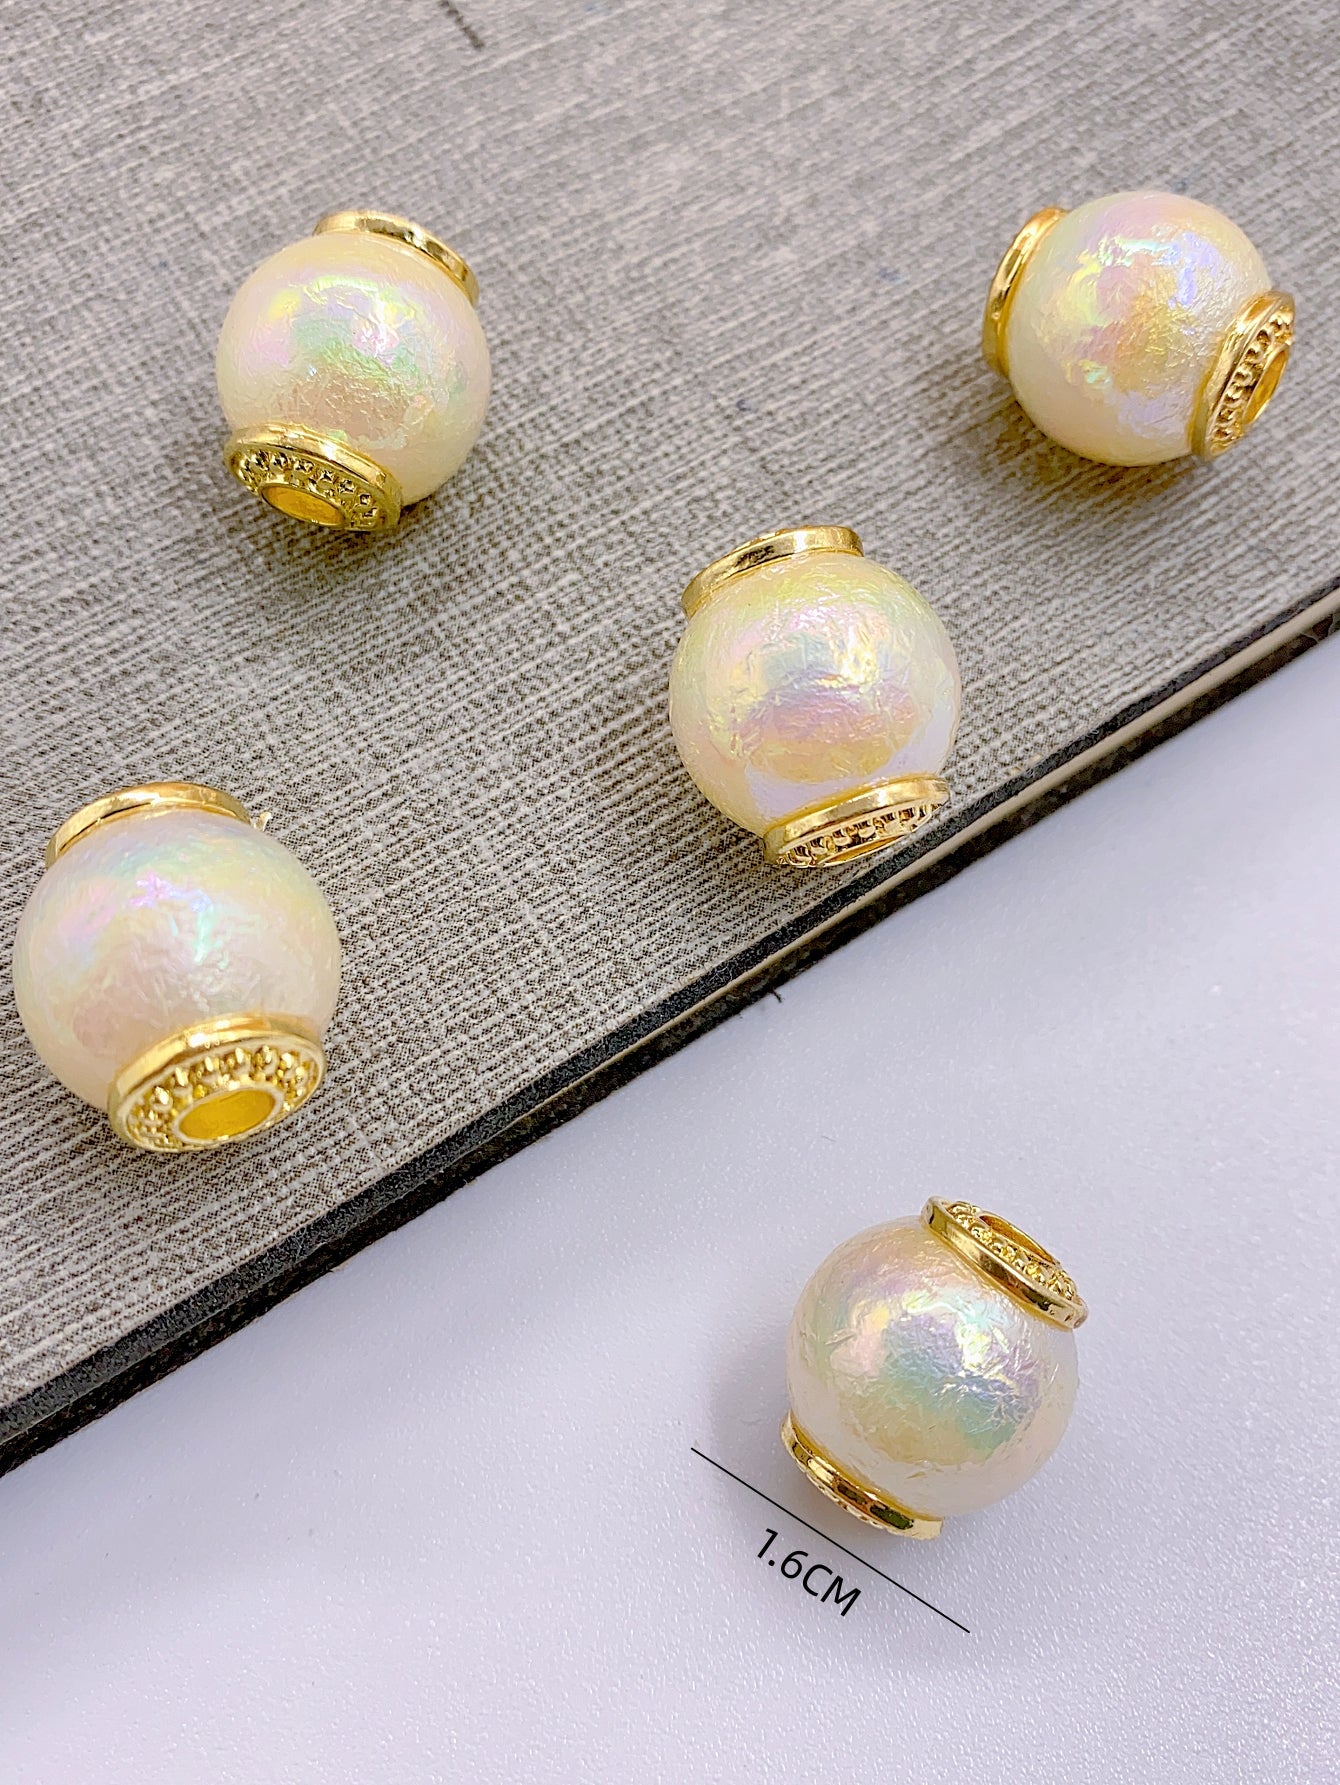 New high-grade bright color wrinkles large hole bead alloy hole paste small fresh clothing accessories Earrings pendant diy pearl jewelry accessories